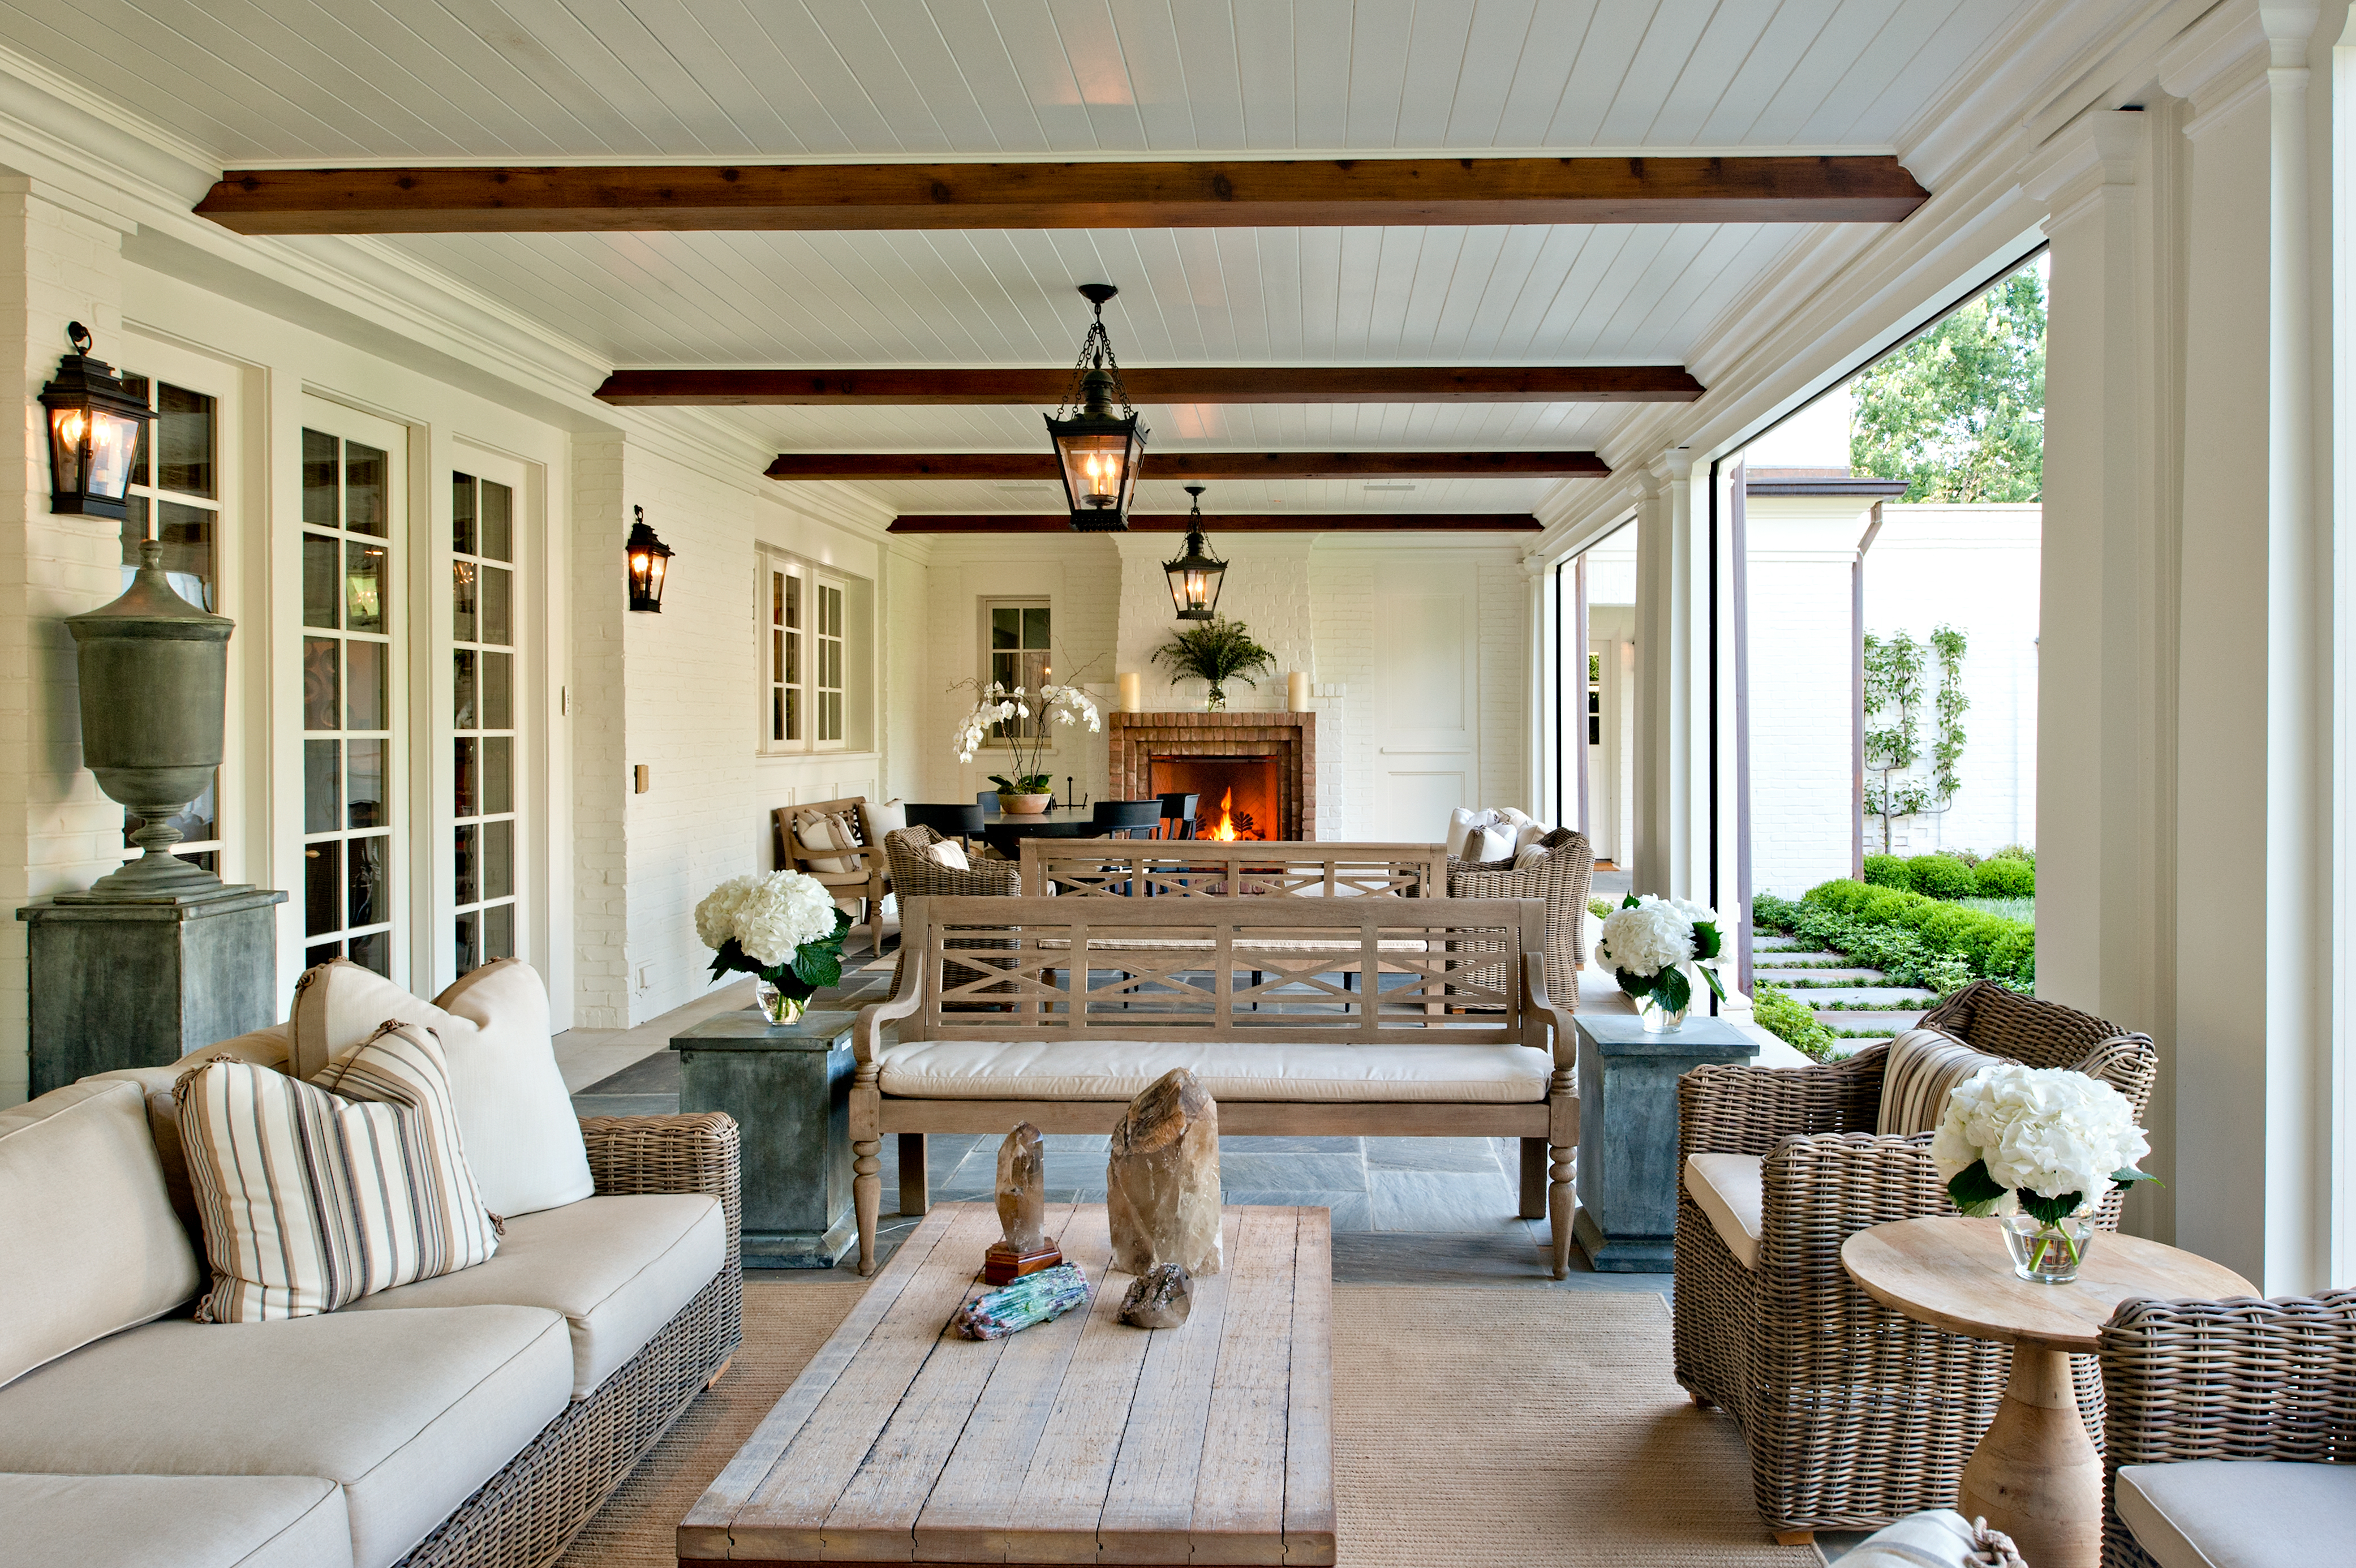 A new porch overlooking the grass courtyard serves as the homeowner’s primary en